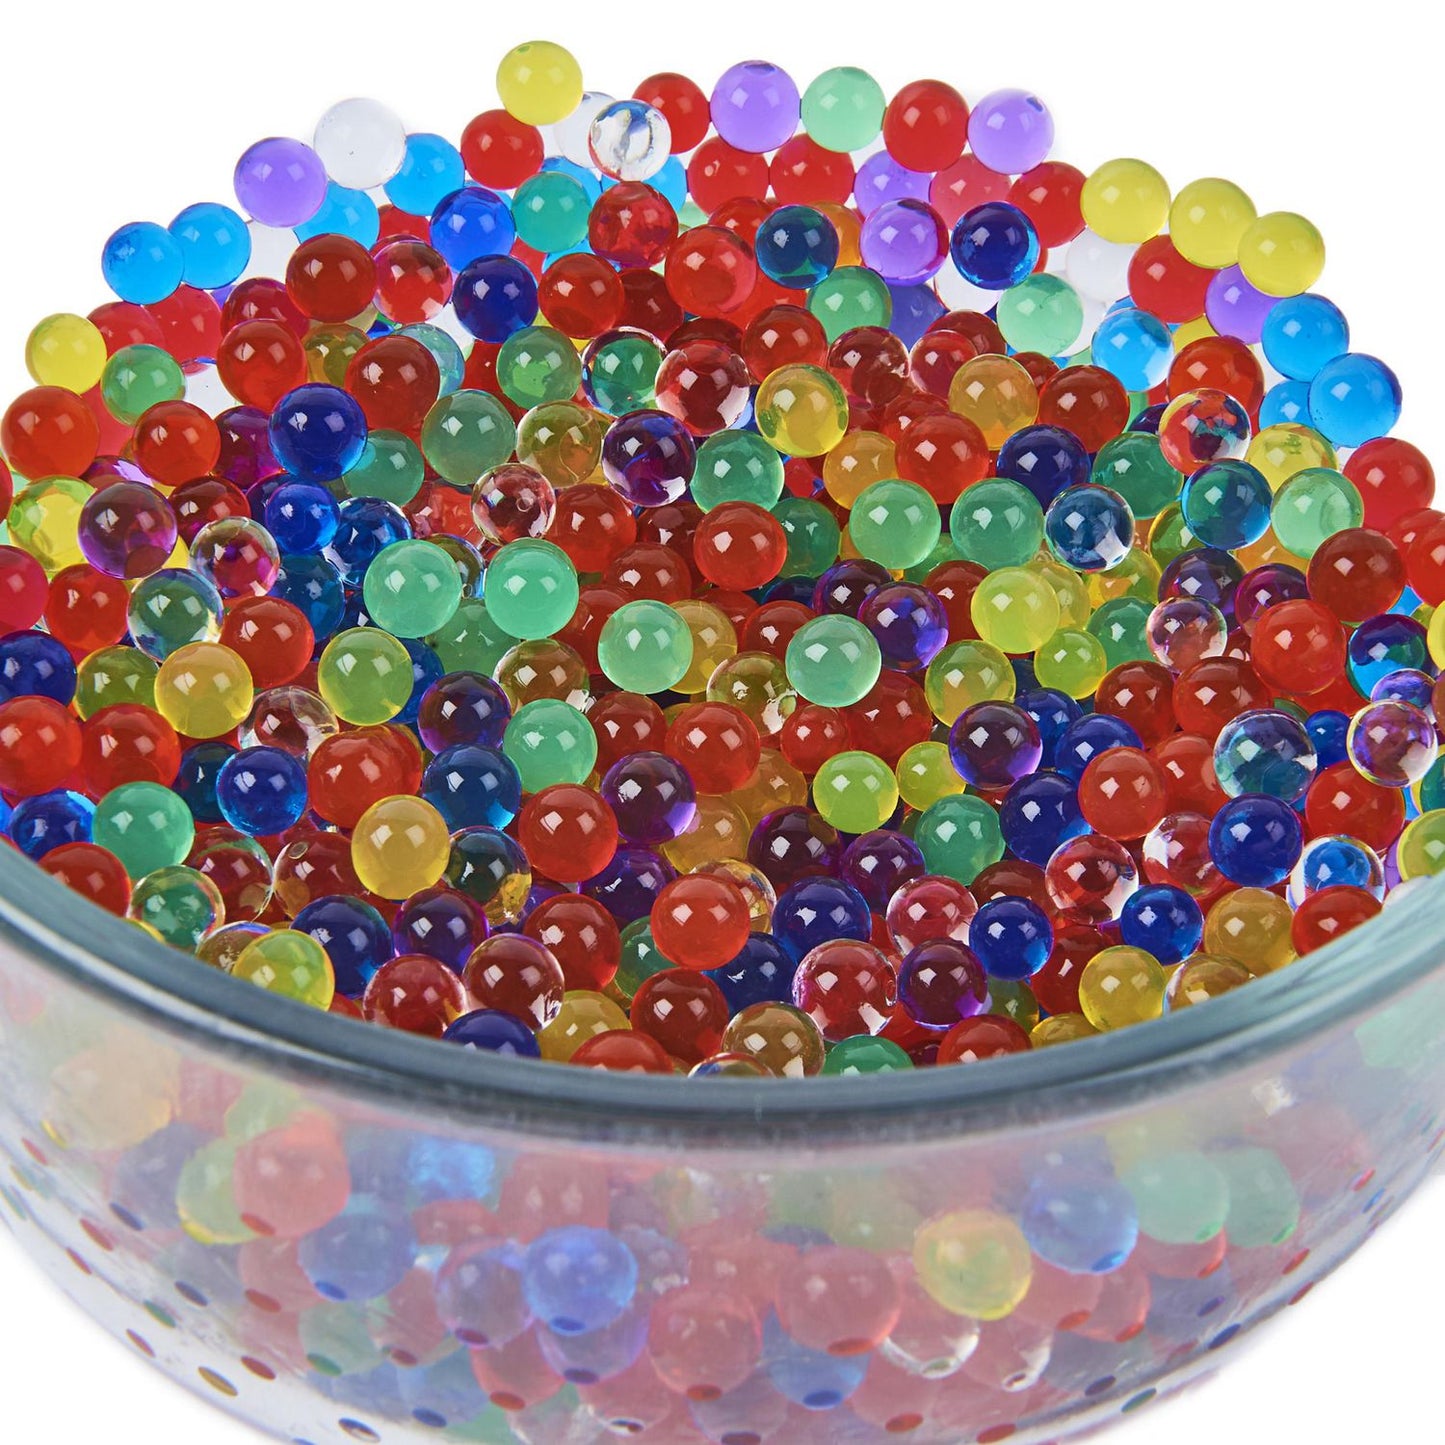 •GROW 1,000 ORBEEZ: Each Color Seed Pack is filled with 1,000 multi-colored Orbeez Seeds! Add the seeds to water and watch them grow! In 4 hours, they’ll be soft, squishy and ready for play!